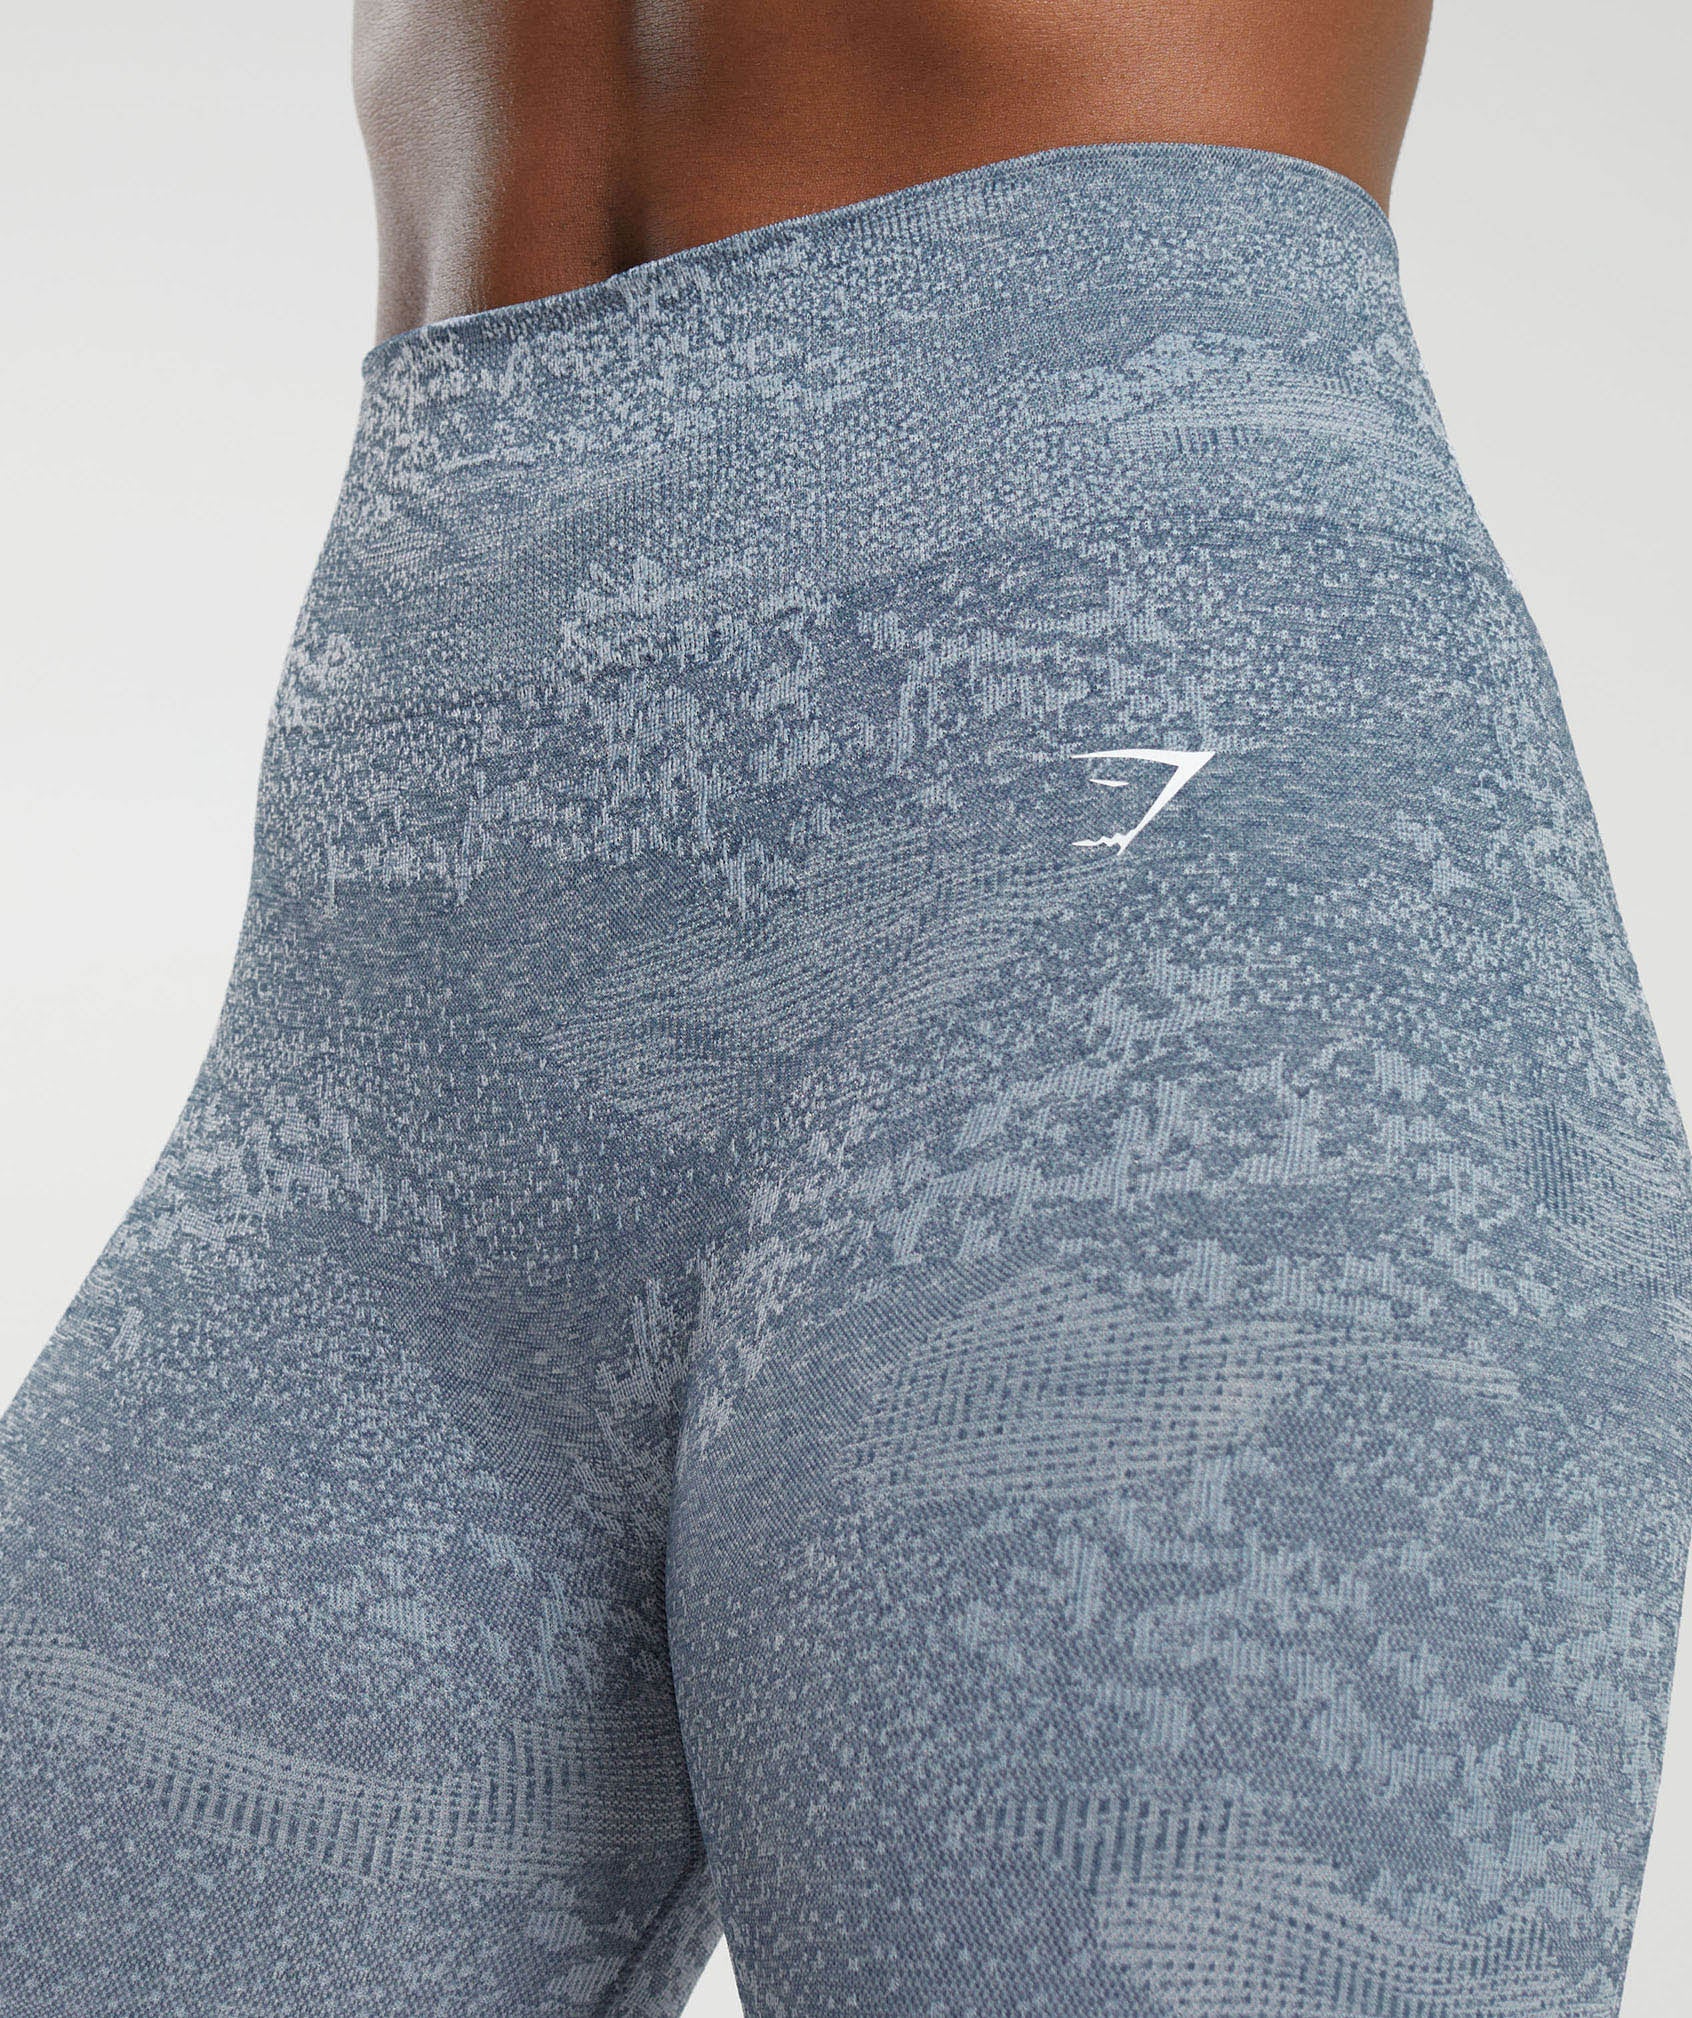 Gymshark Adapt Camo Seamless Leggings- S for Sale in Portland, OR - OfferUp